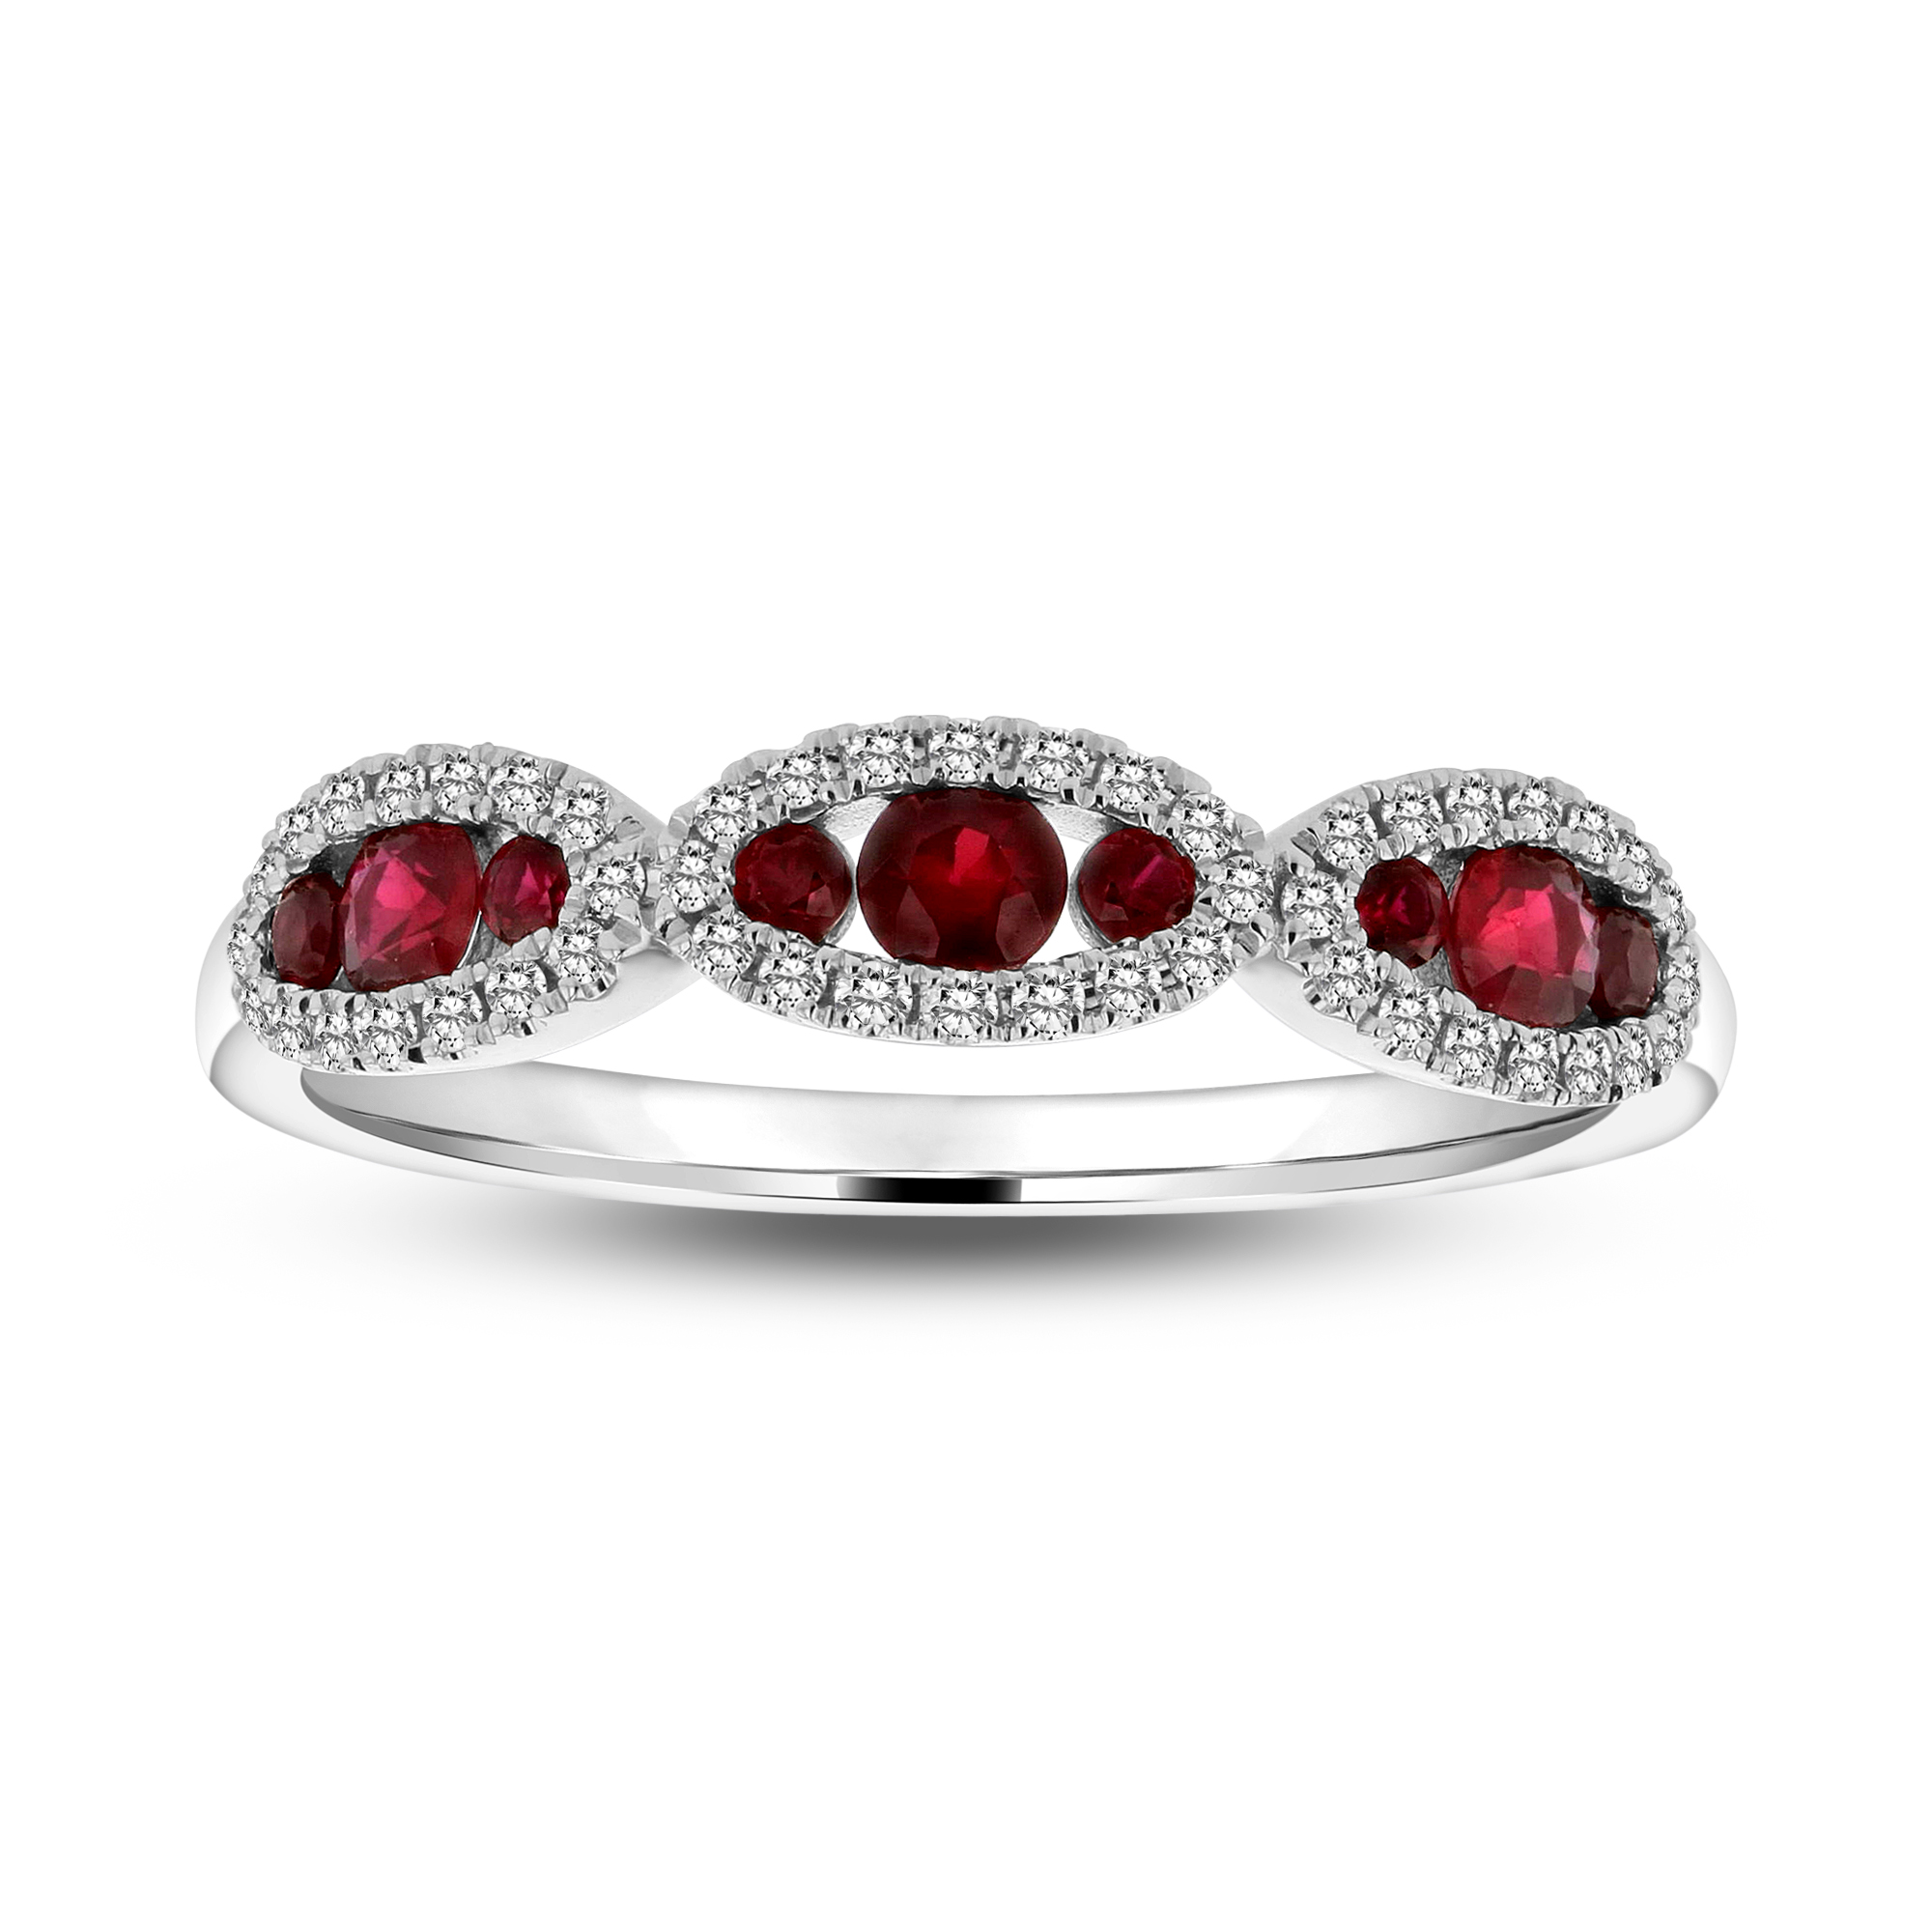 View 0.54ctw Diamond and Ruby Band in 14k White Gold